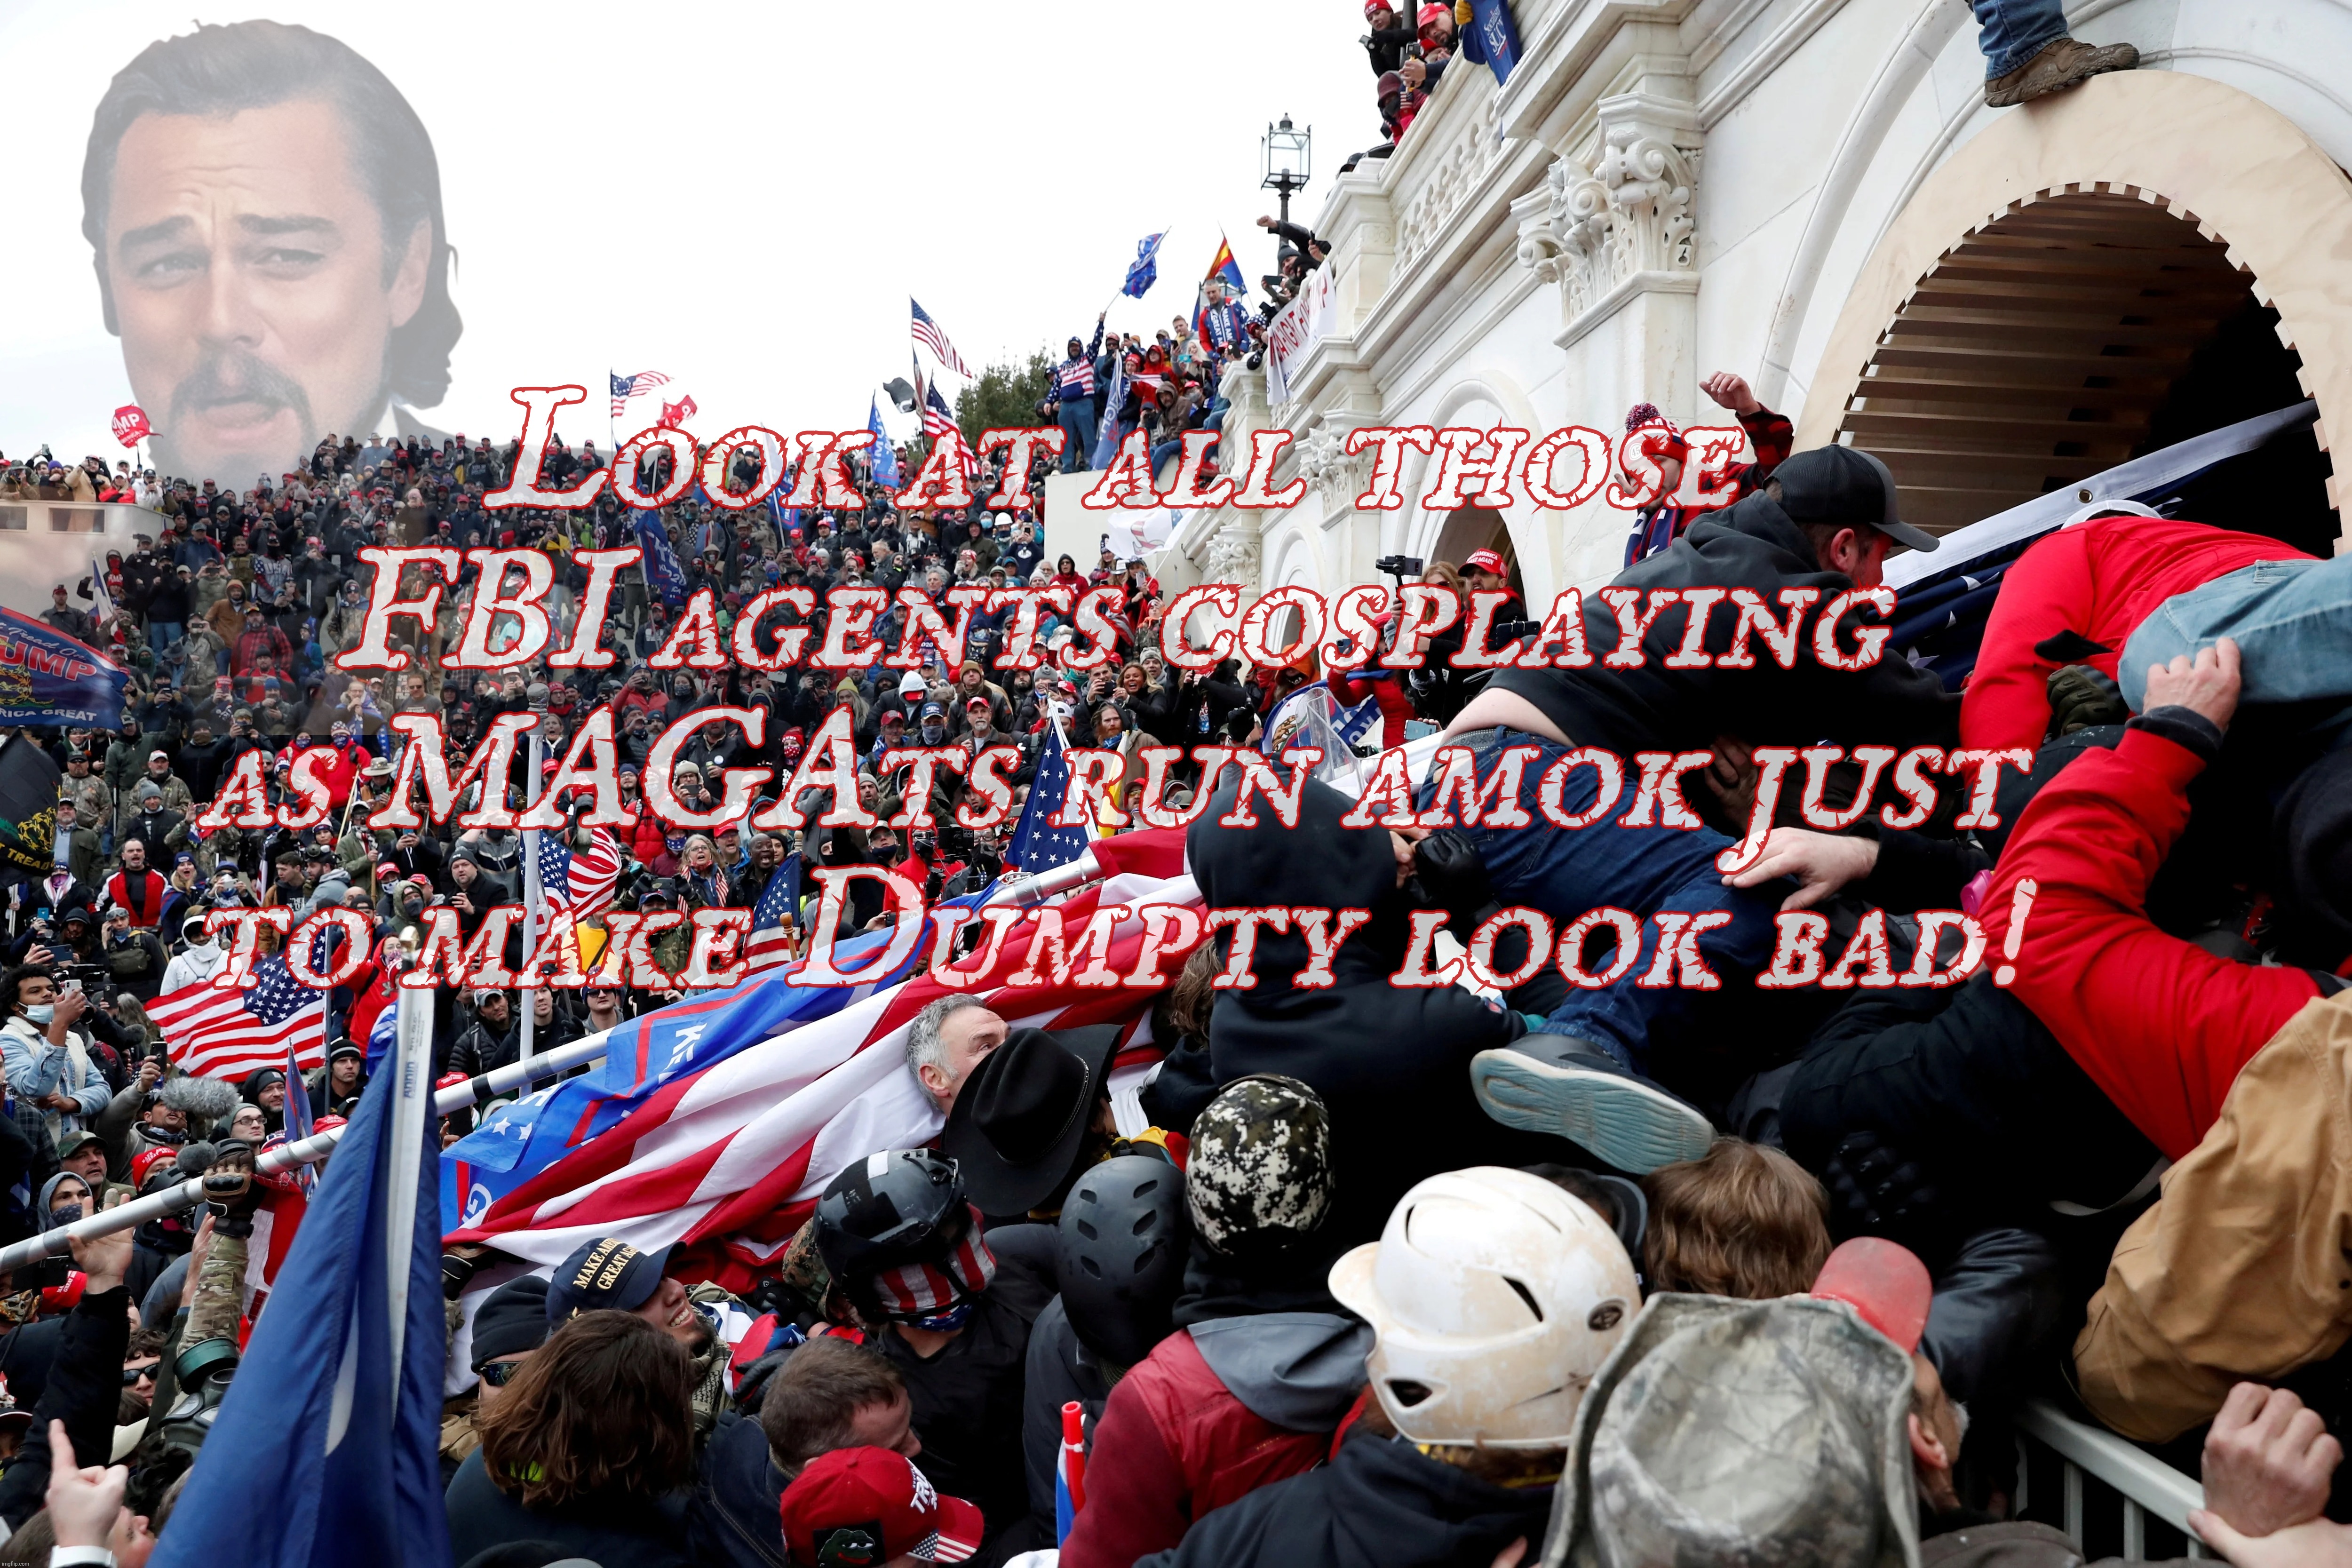 Look at all those FBI agents cosplaying as MAGAts run amok just to make Dumpty look bad! | made w/ Imgflip meme maker